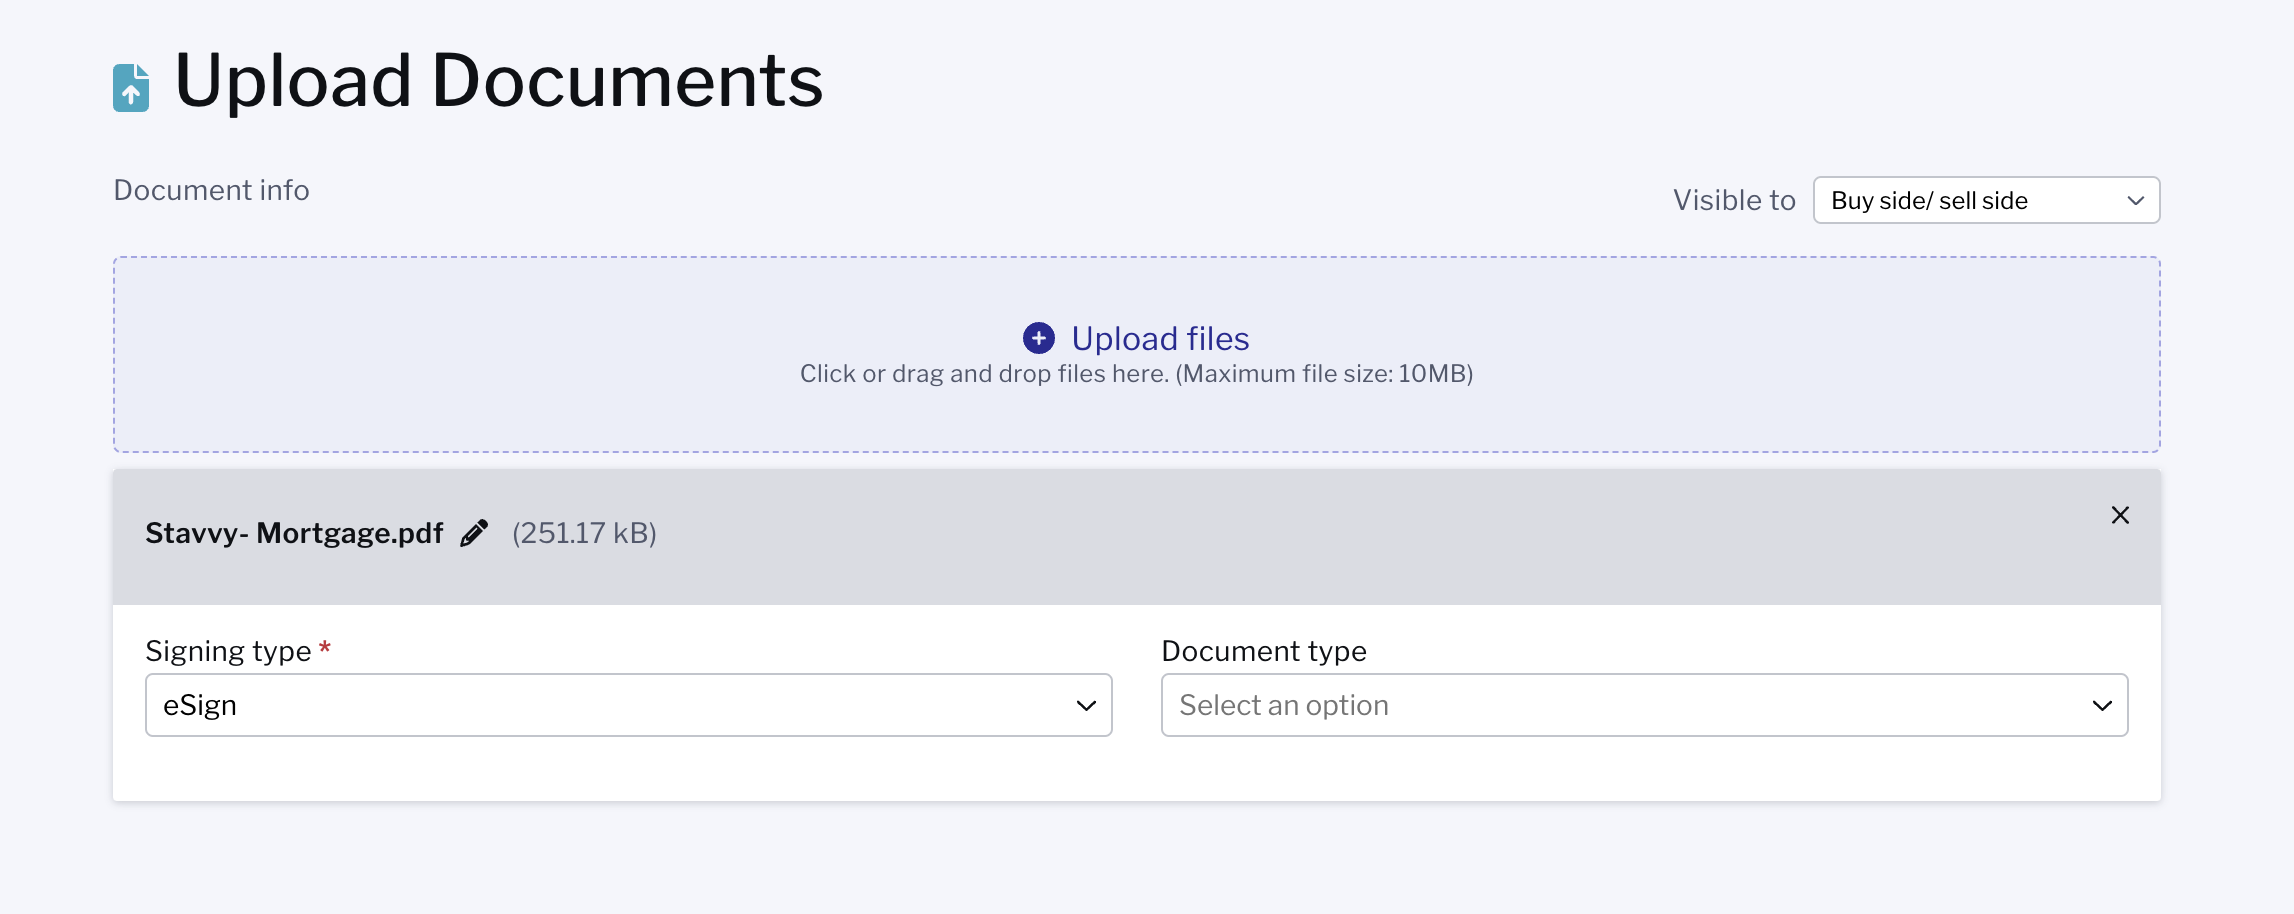 Screenshot of Upload Documents page